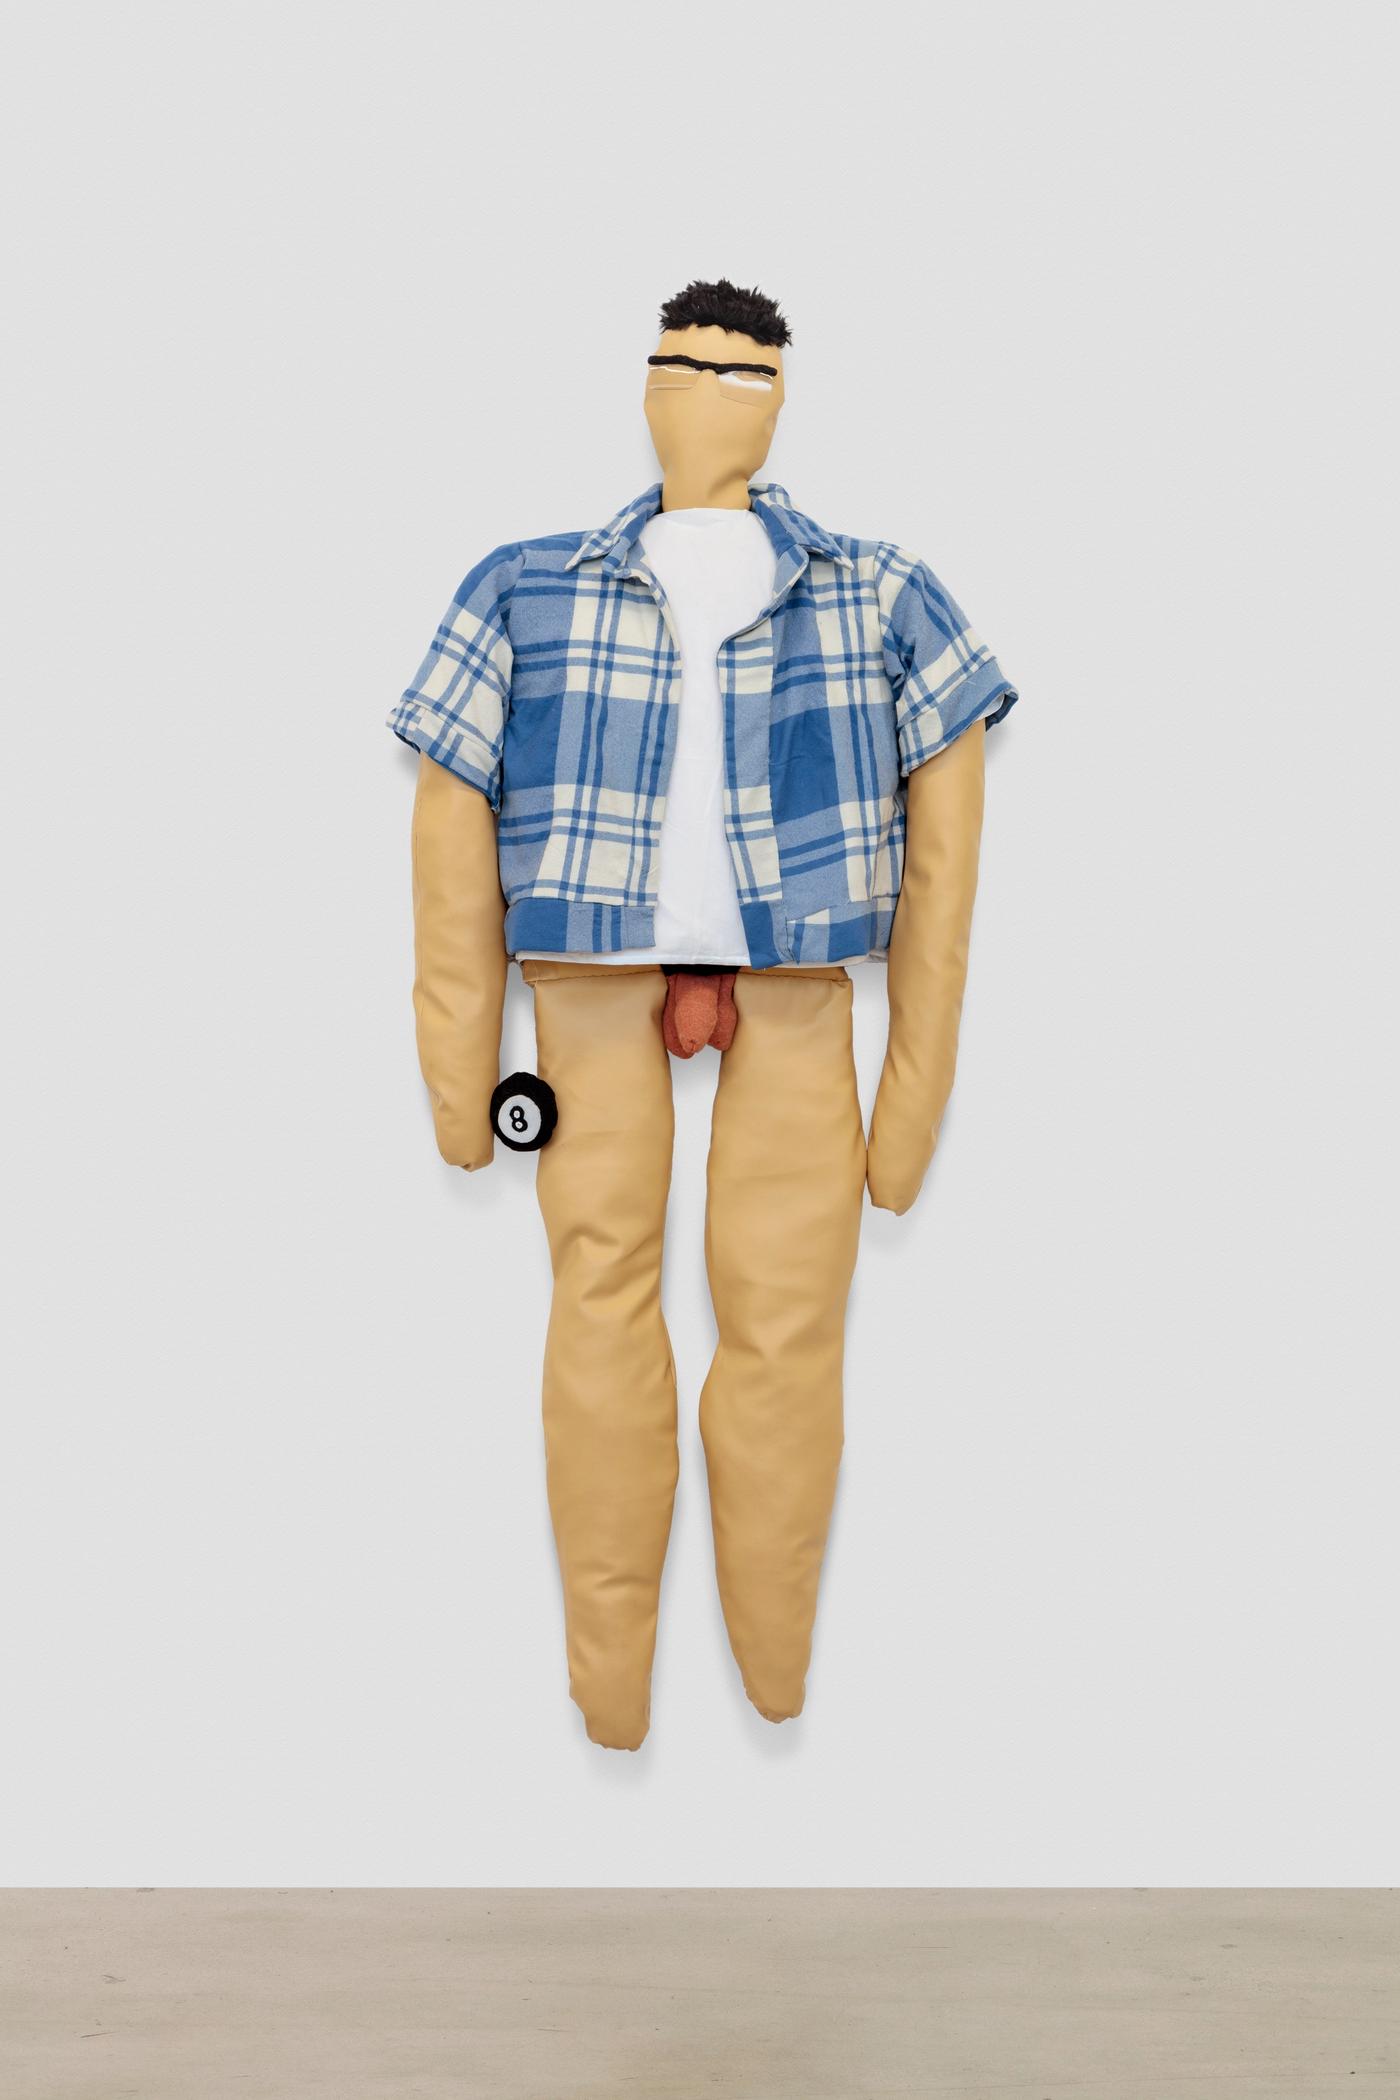 Image of Top with Blue Plaid and 8 Ball, 2021: Vinyl, upholstery foam, polyfil, wood stadium blanket, faux fur